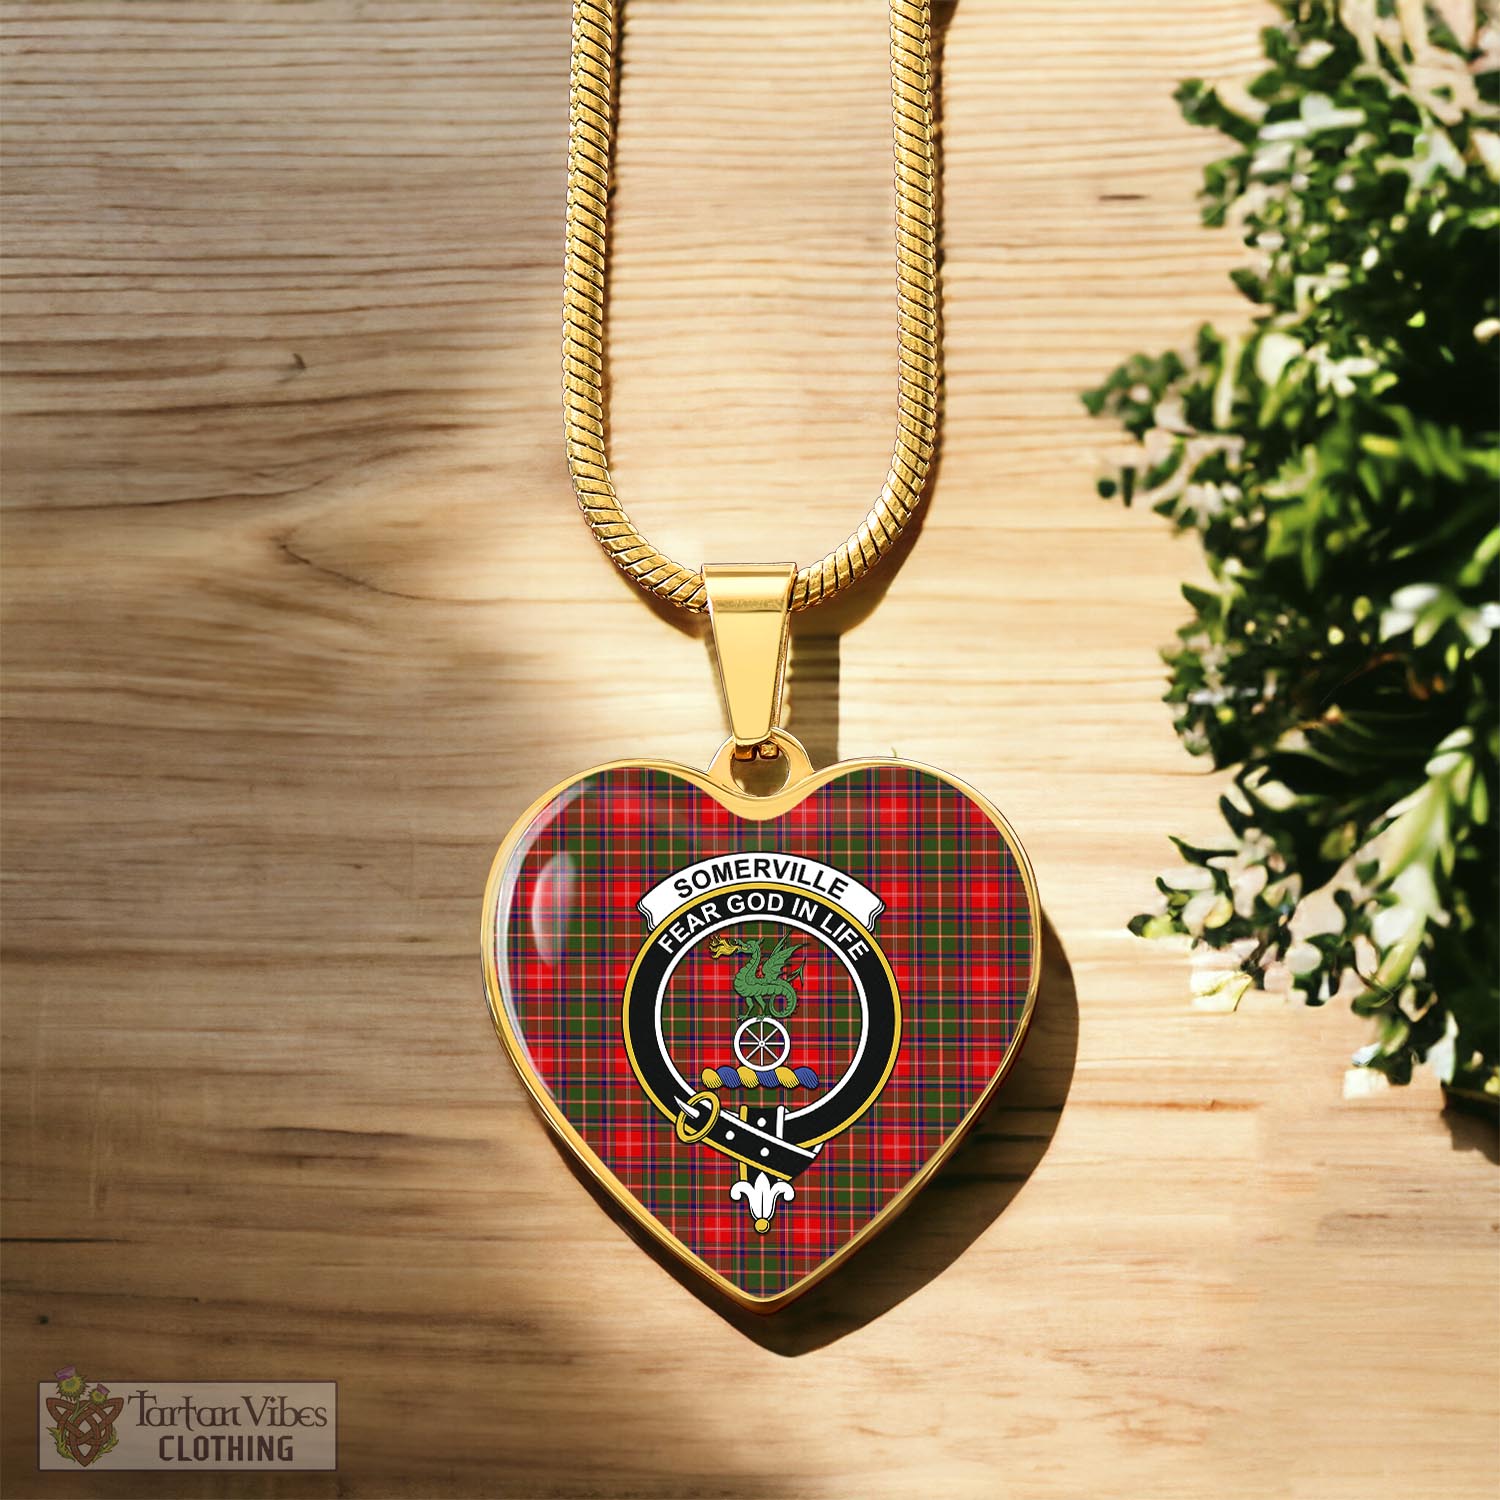 Tartan Vibes Clothing Somerville Modern Tartan Heart Necklace with Family Crest